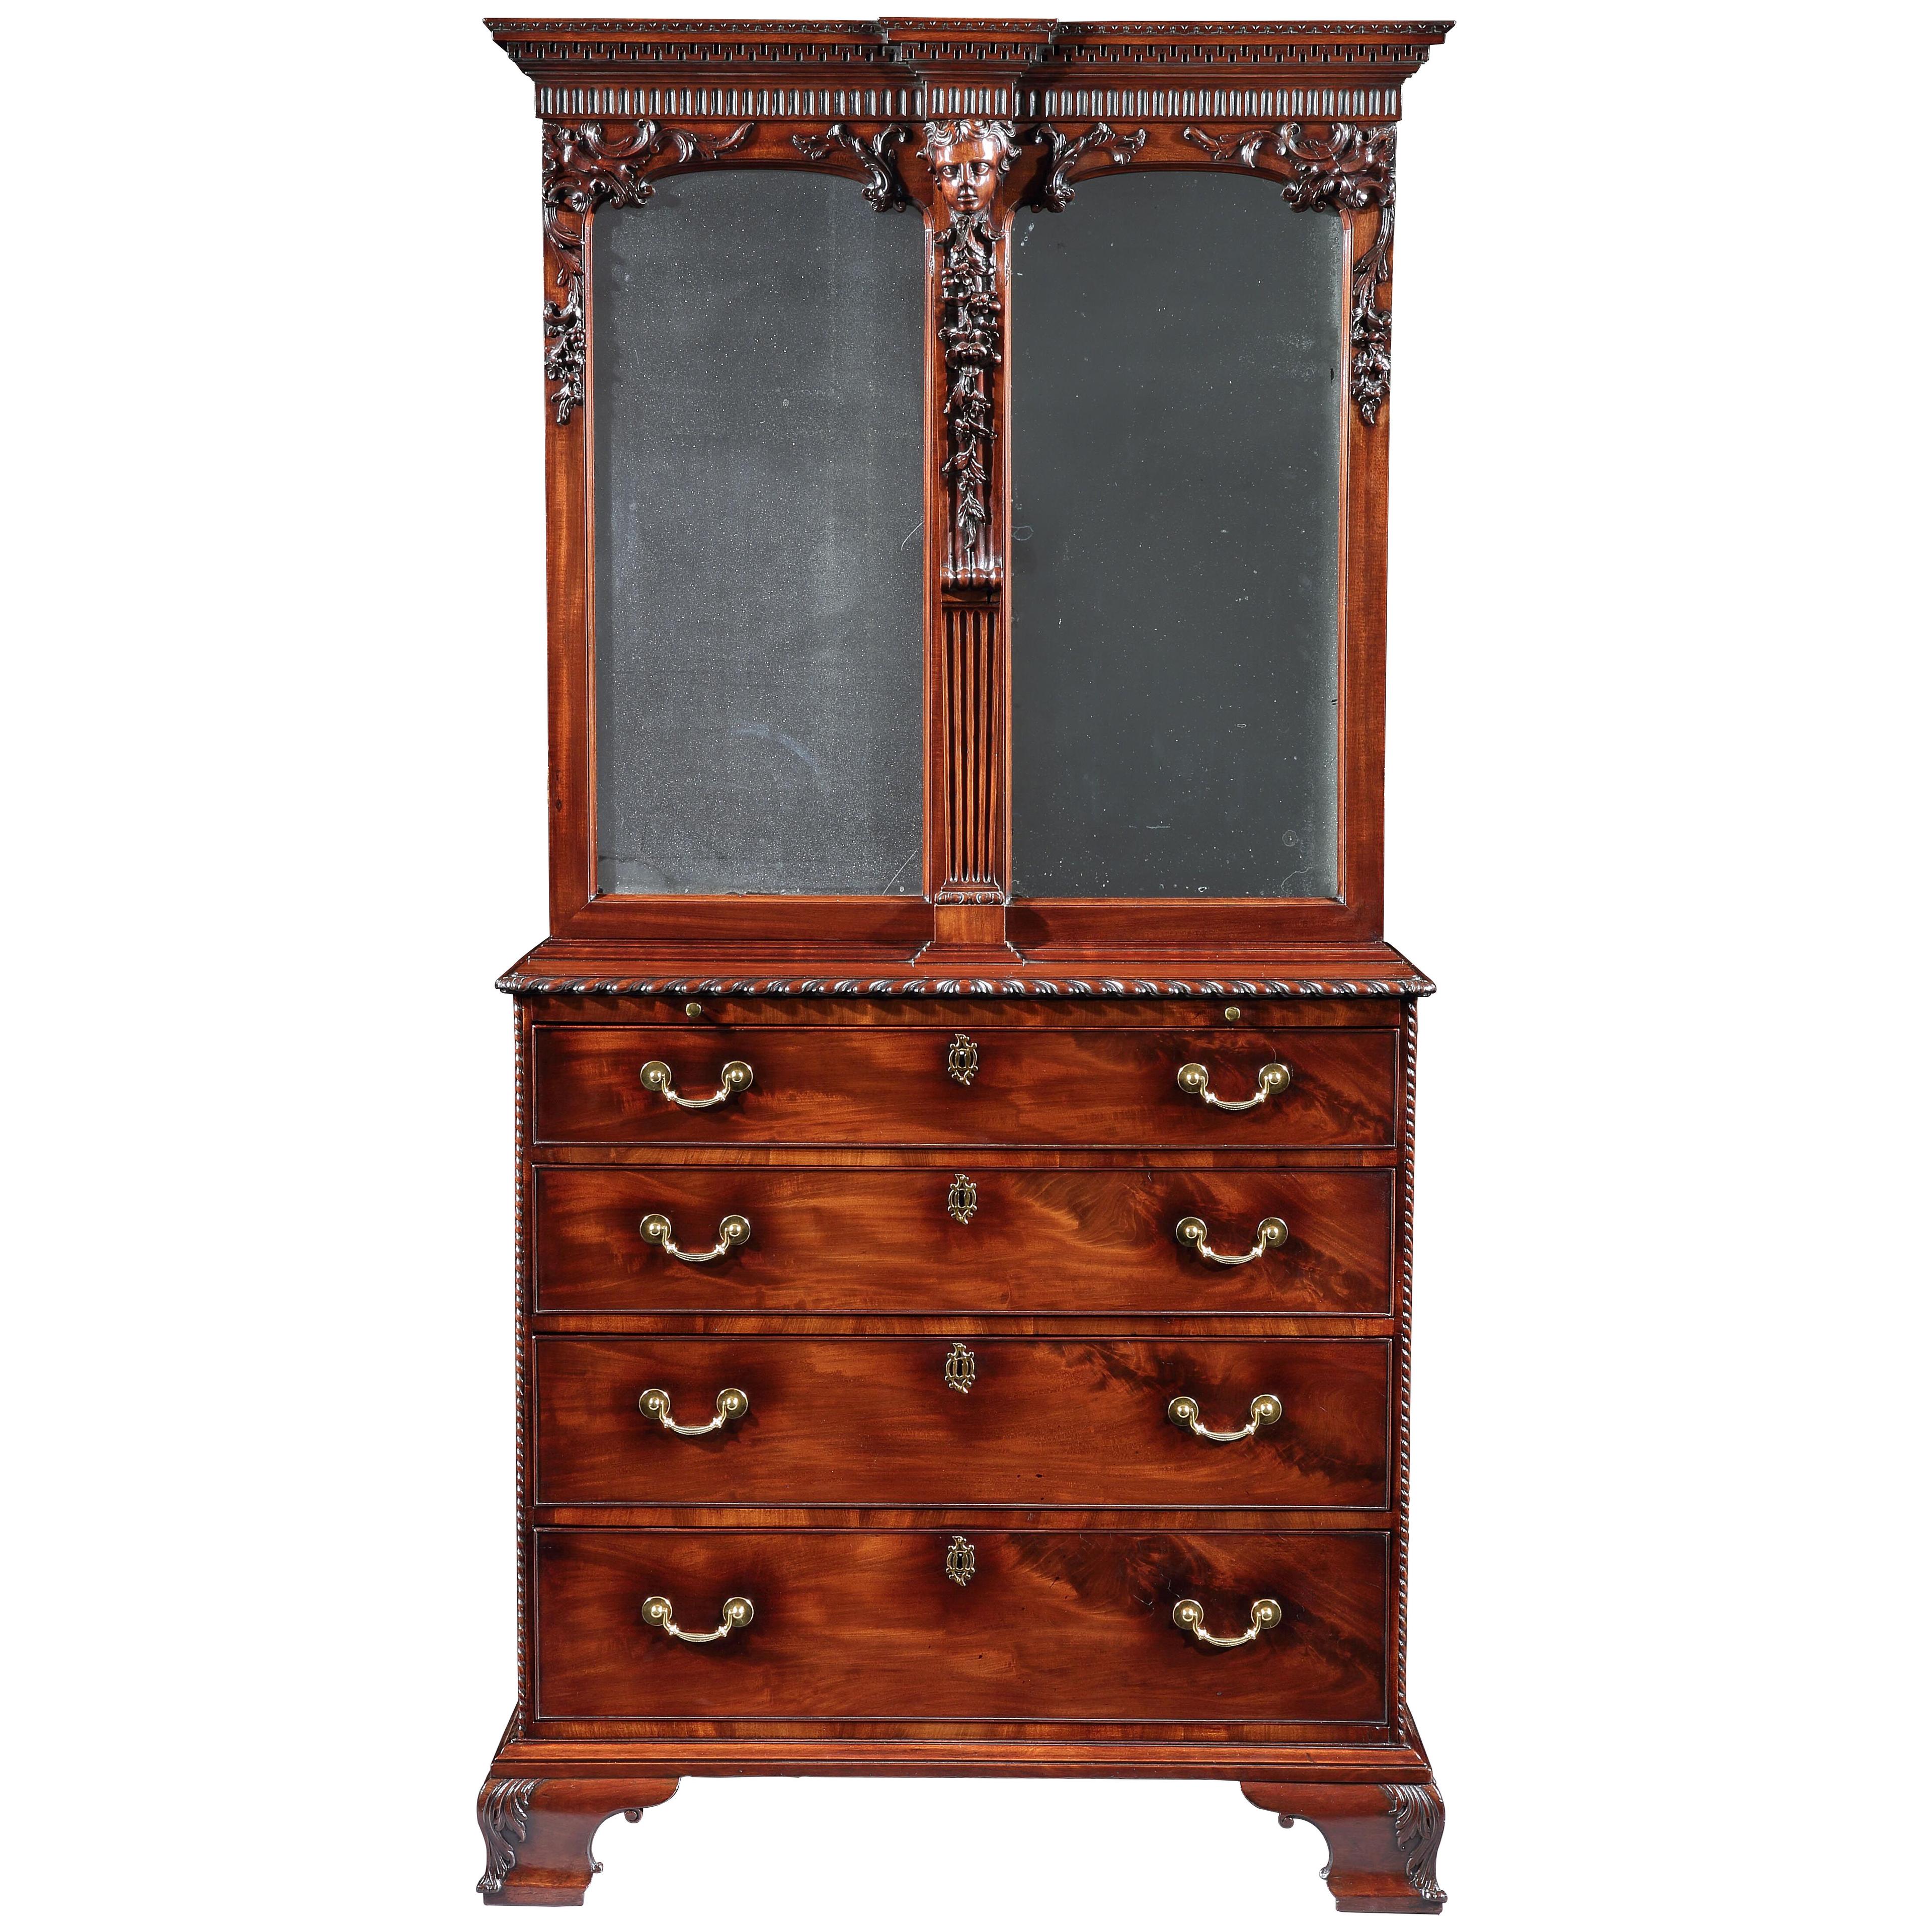 A GEORGE II MAHOGANY CABINET ATTRIBUTED TO WILLIAM VILE